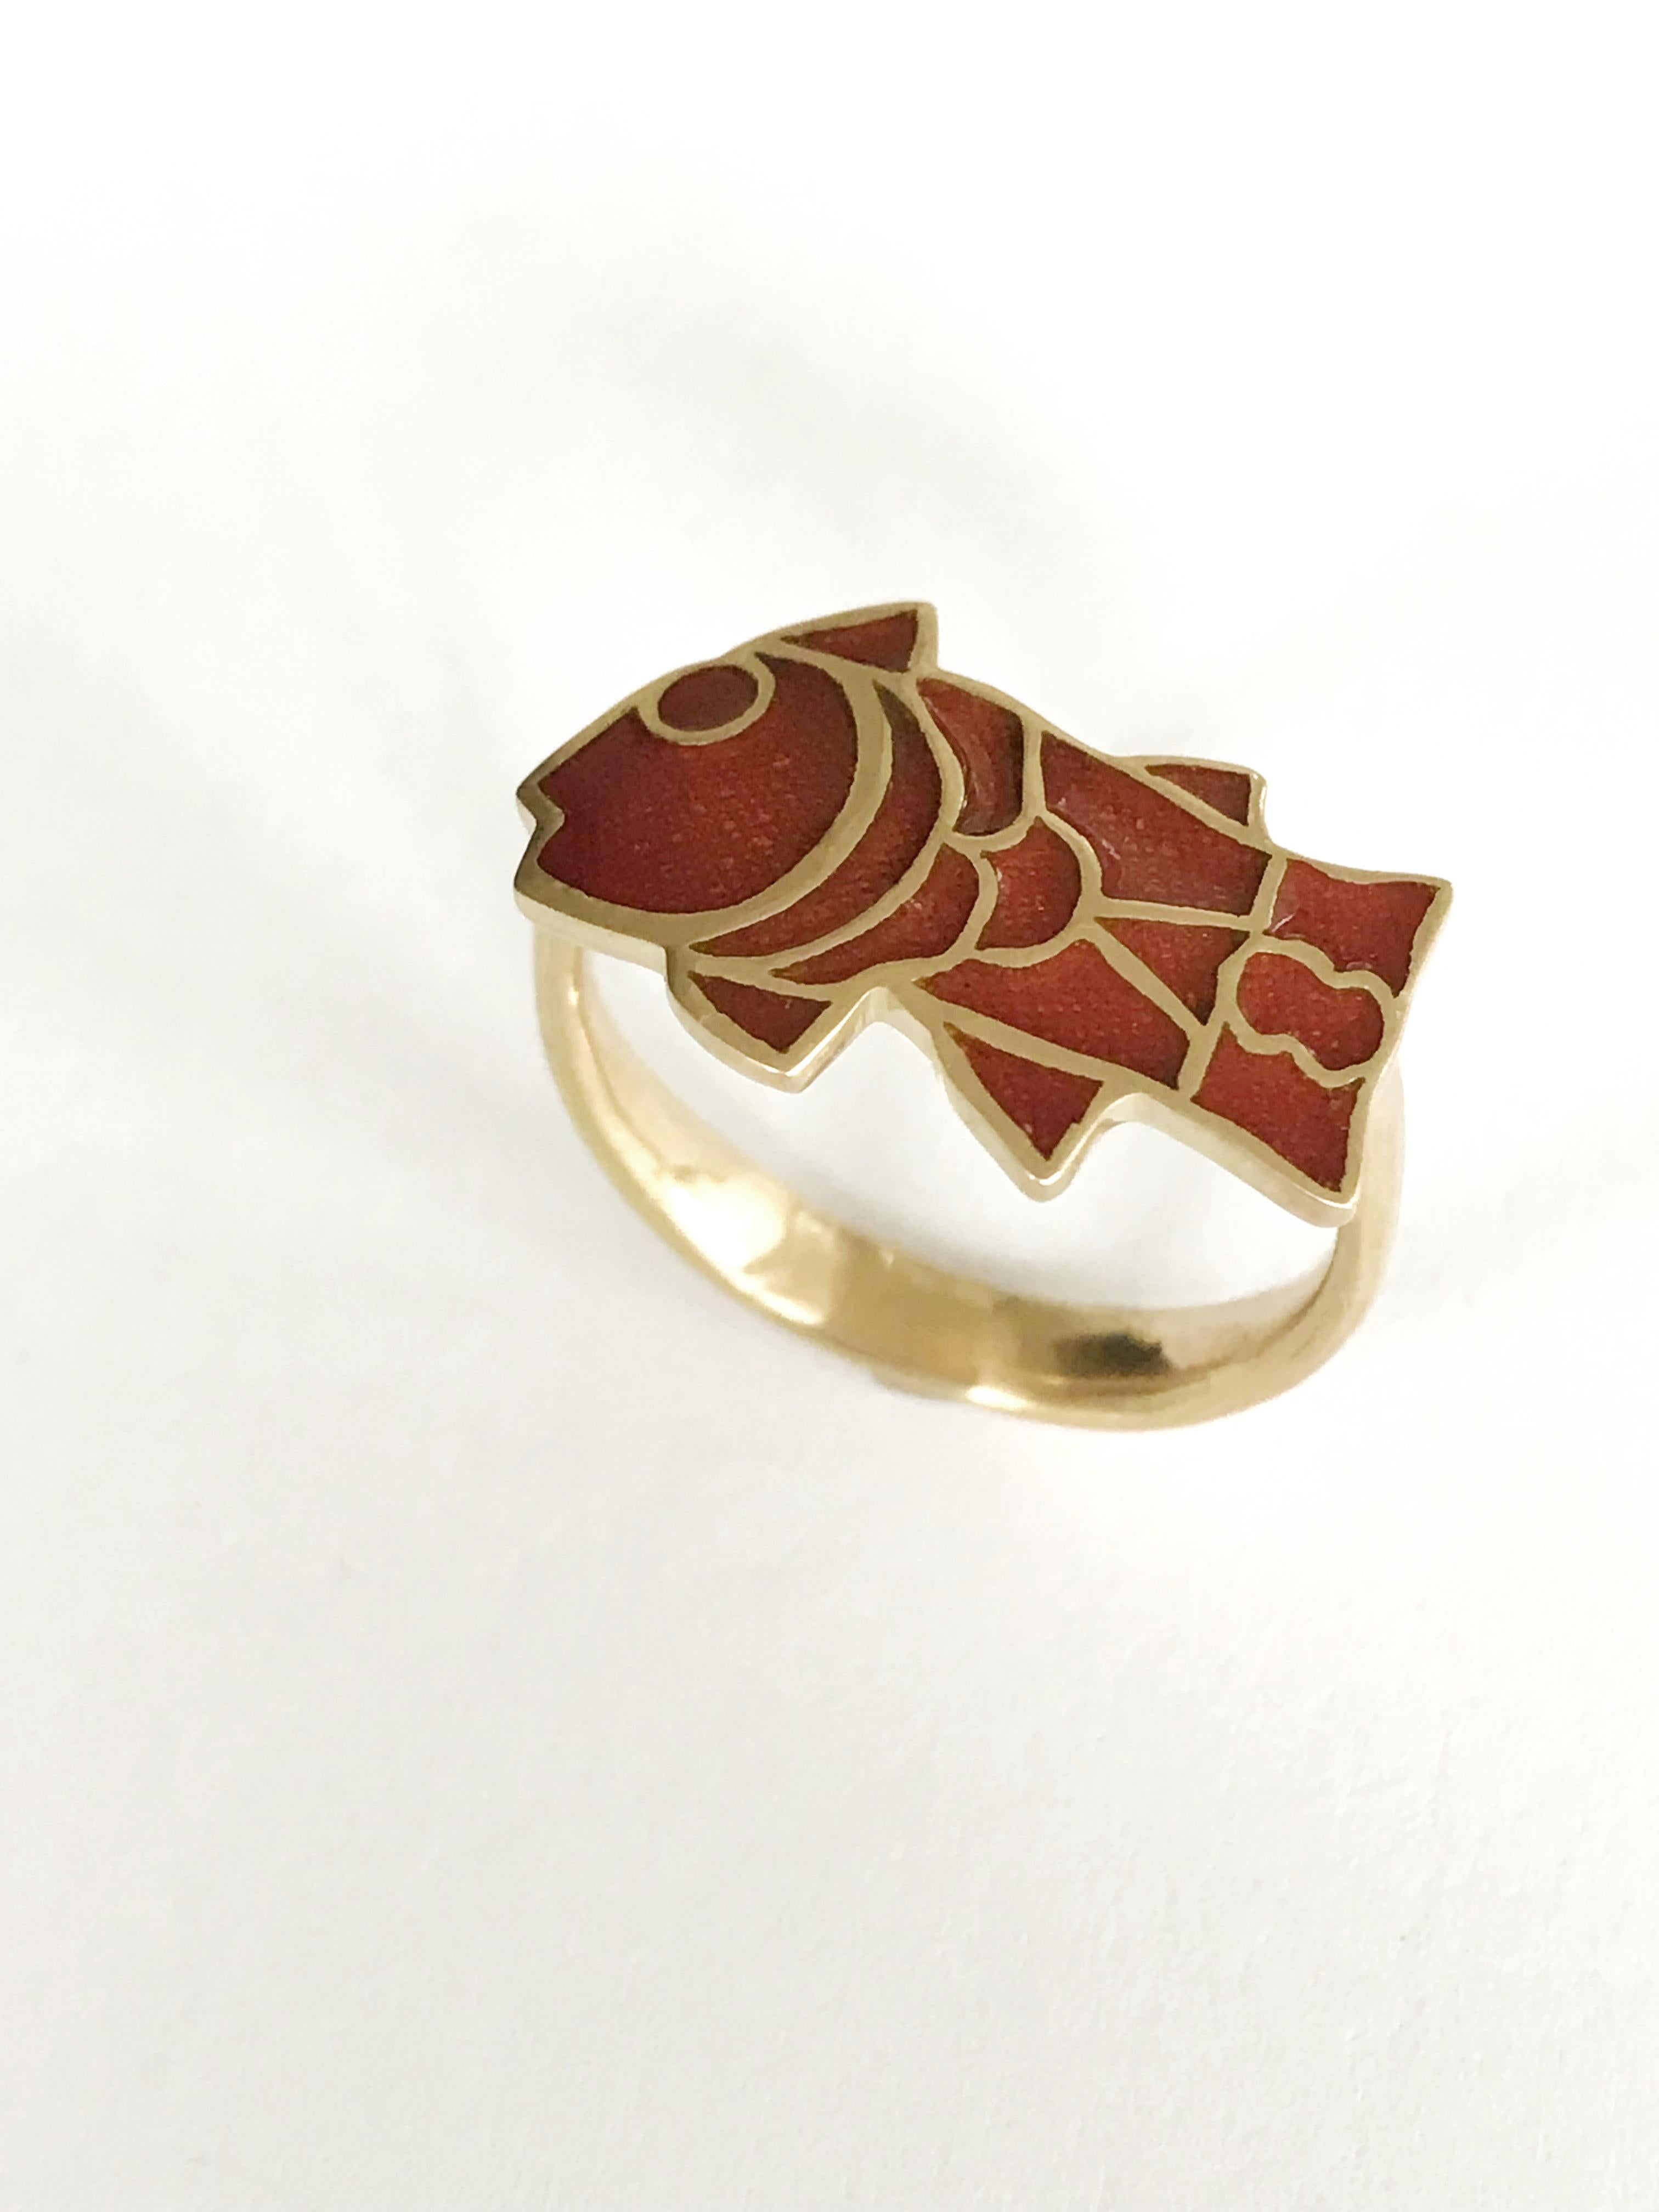 Dalben design fish shape red fire enamel and 18 k yellow gold ring inspired by Longobard jewelry.
Ring size 6 3/4 USA - EU 54 .
Fish dimensions :
height 12,2 mm
width 19,2 mm
The ring has been designed and handcrafted in our atelier in Como Italy